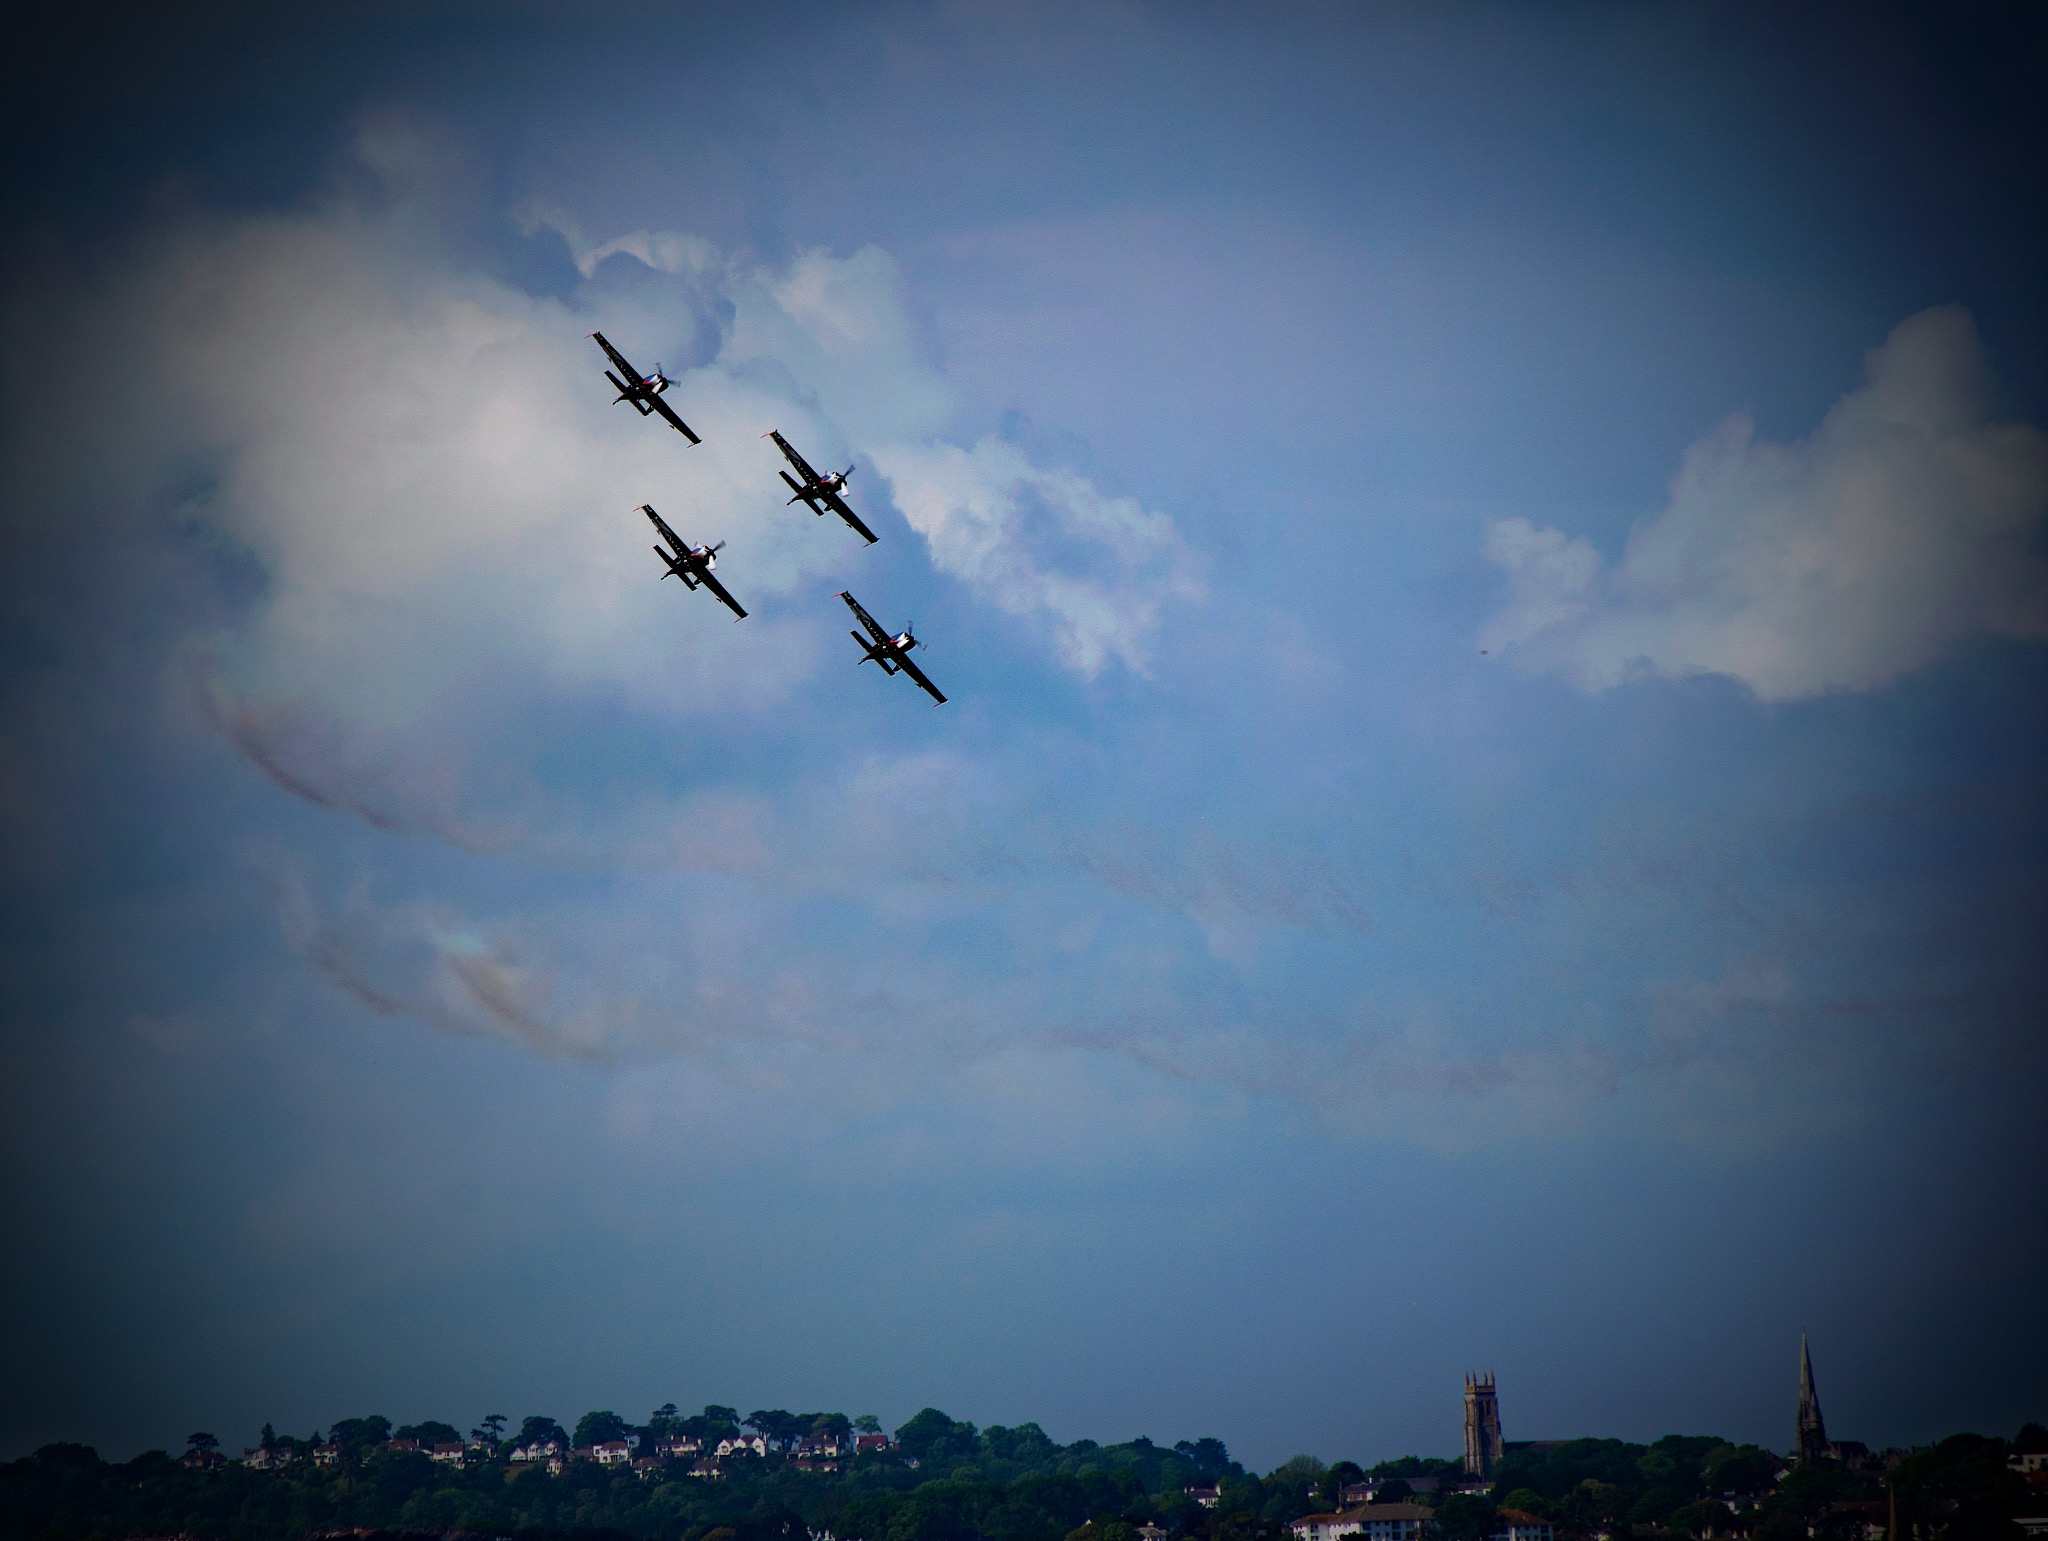 Torbay Airshow and A formation of planes